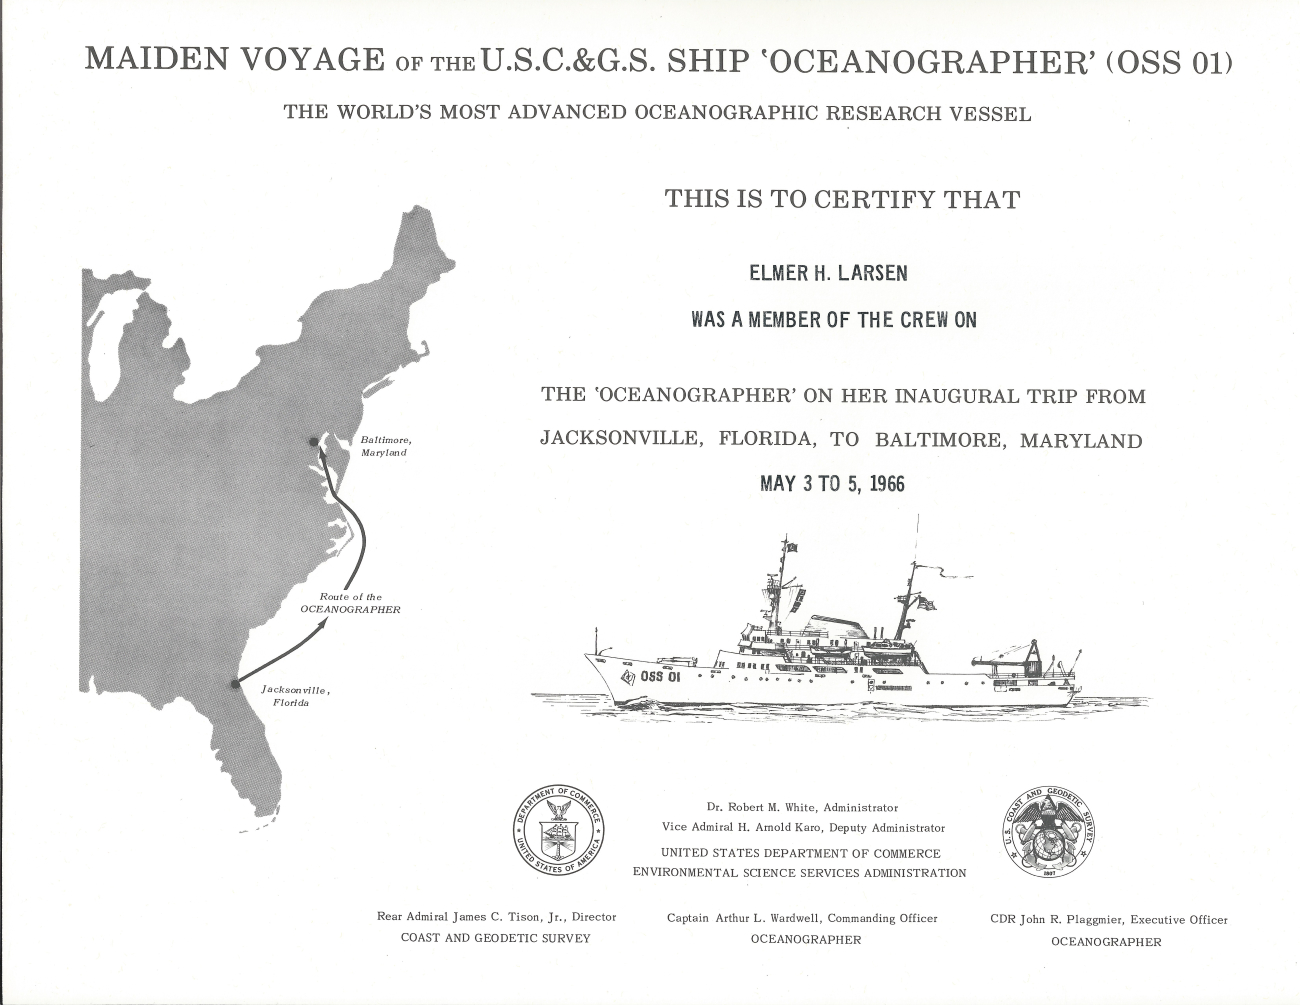 Certificate certifying that Elmer Larsen was a member of the crew of theUSC&GS; Ship OCEANOGRAPHER on its inaugural trip